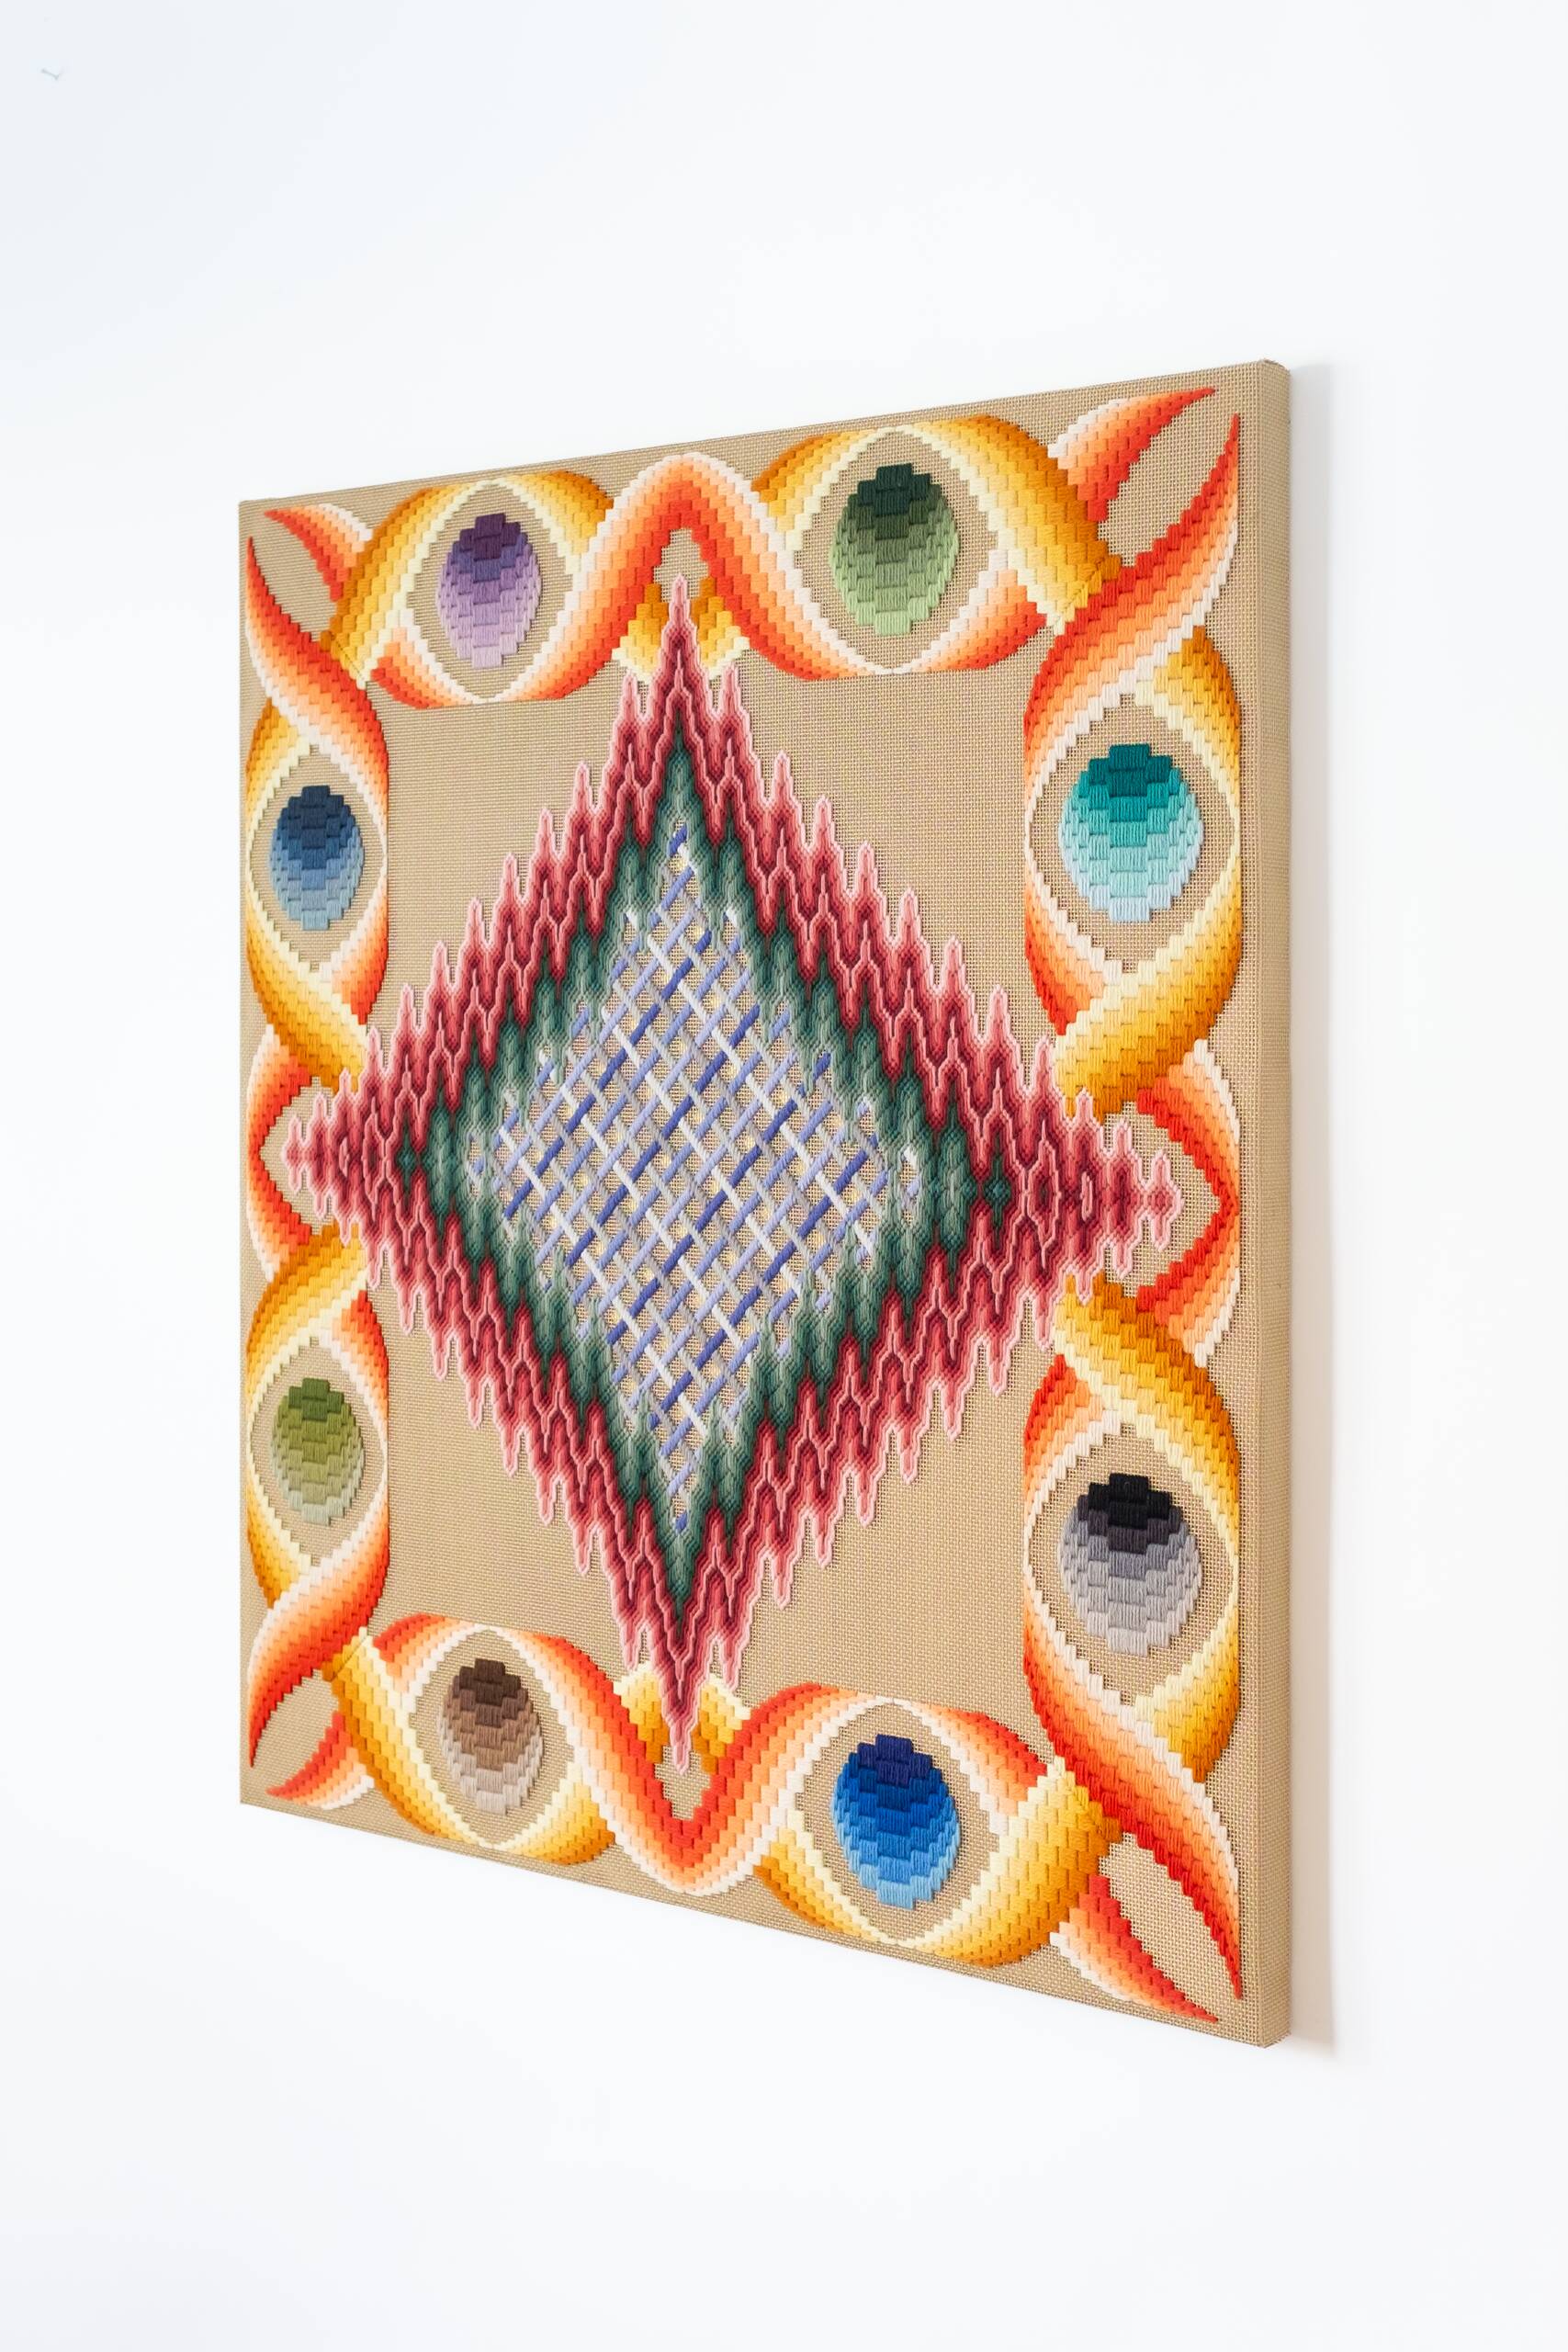 sky-mask bearing the hint of eyes, or of a mouth, or perhaps both [pink-green psychic portal], Hand-embroidered wool yarn on cotton canvas over cedar panel, 24-carat gold leaf, 2024